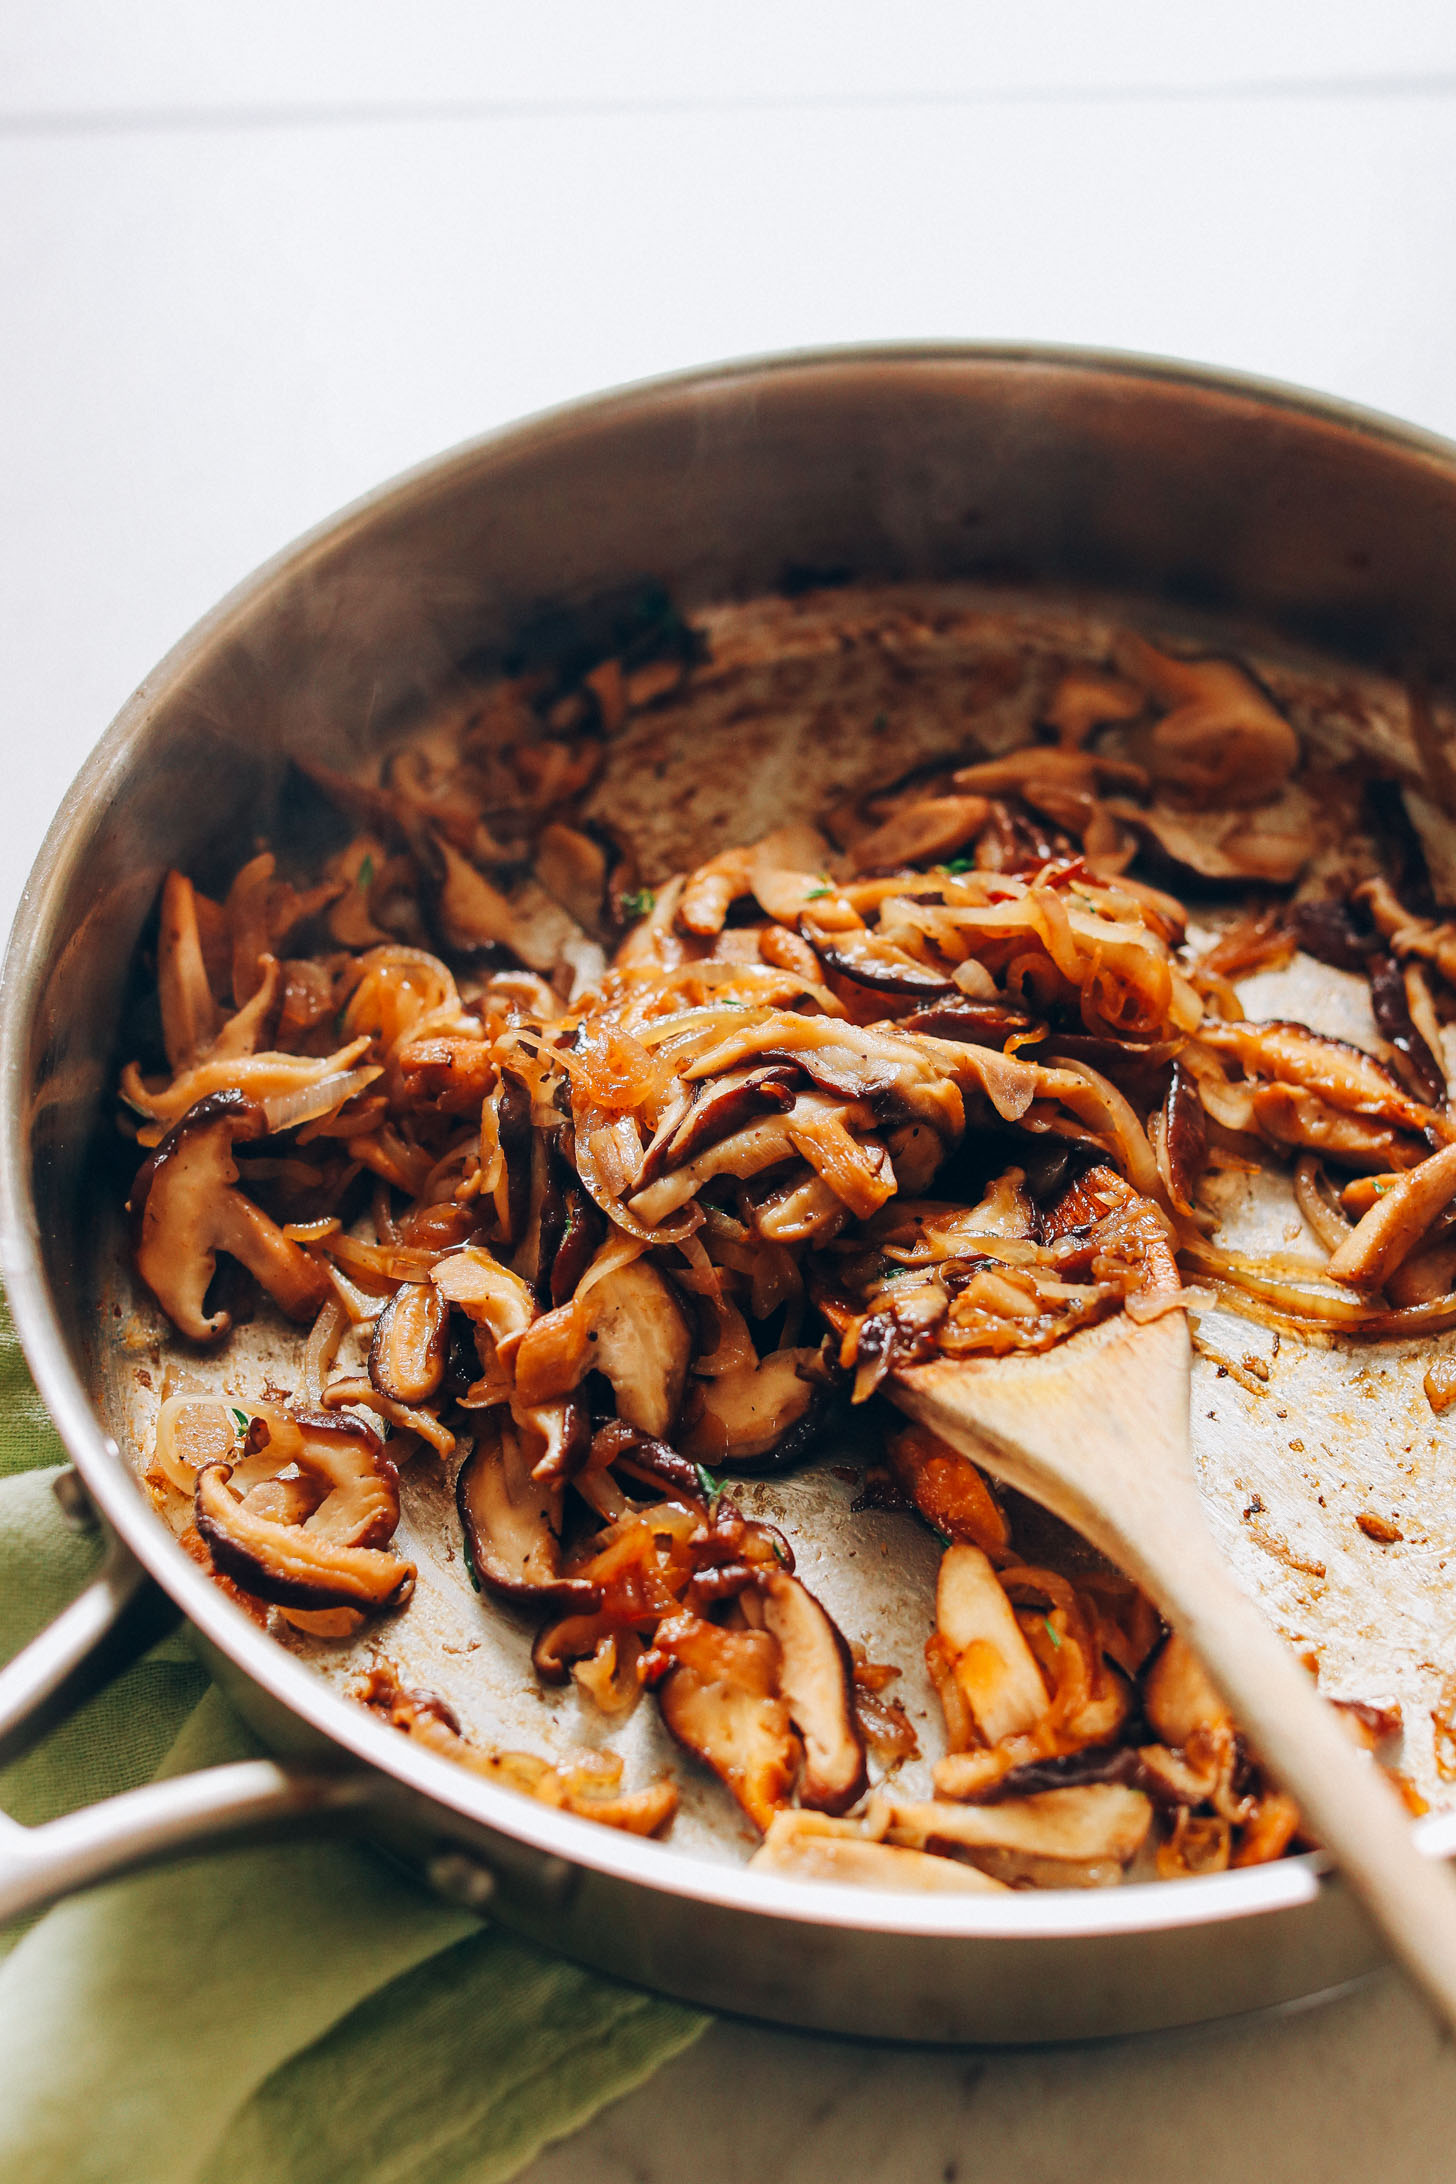 Skillet filled with Caramelized Shiitake Mushrooms and onions for homemade vegan risotto